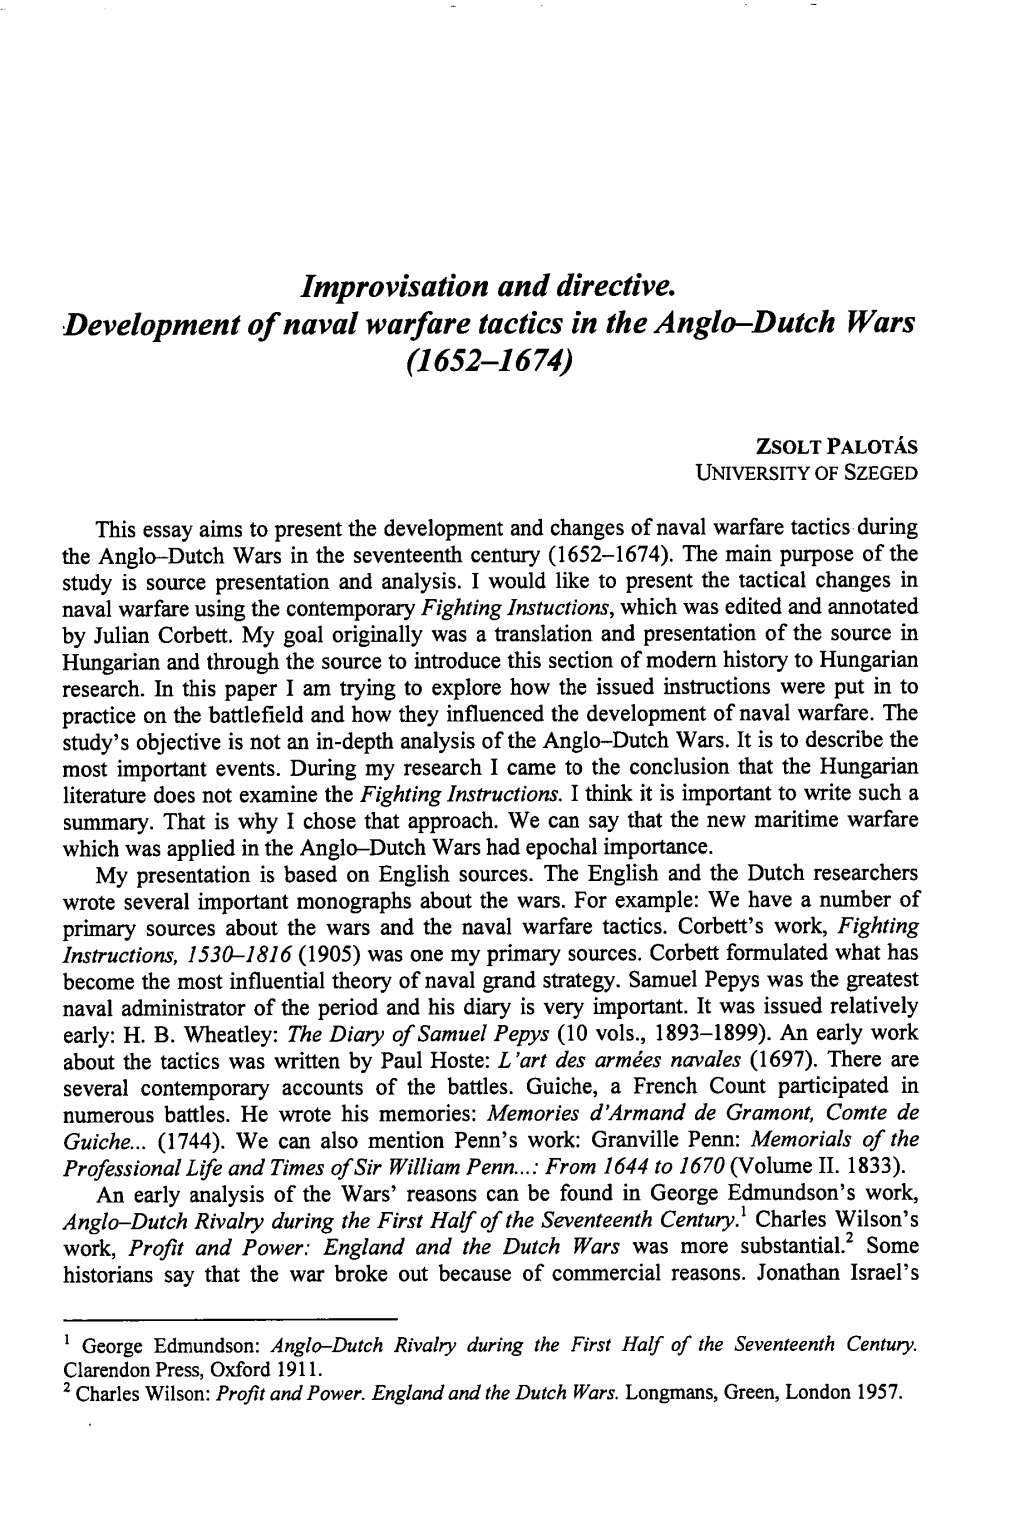 Improvisation and Directive. Development of Naval Warfare Tactics in the Anglo-Dutch Wars (1652-1674)